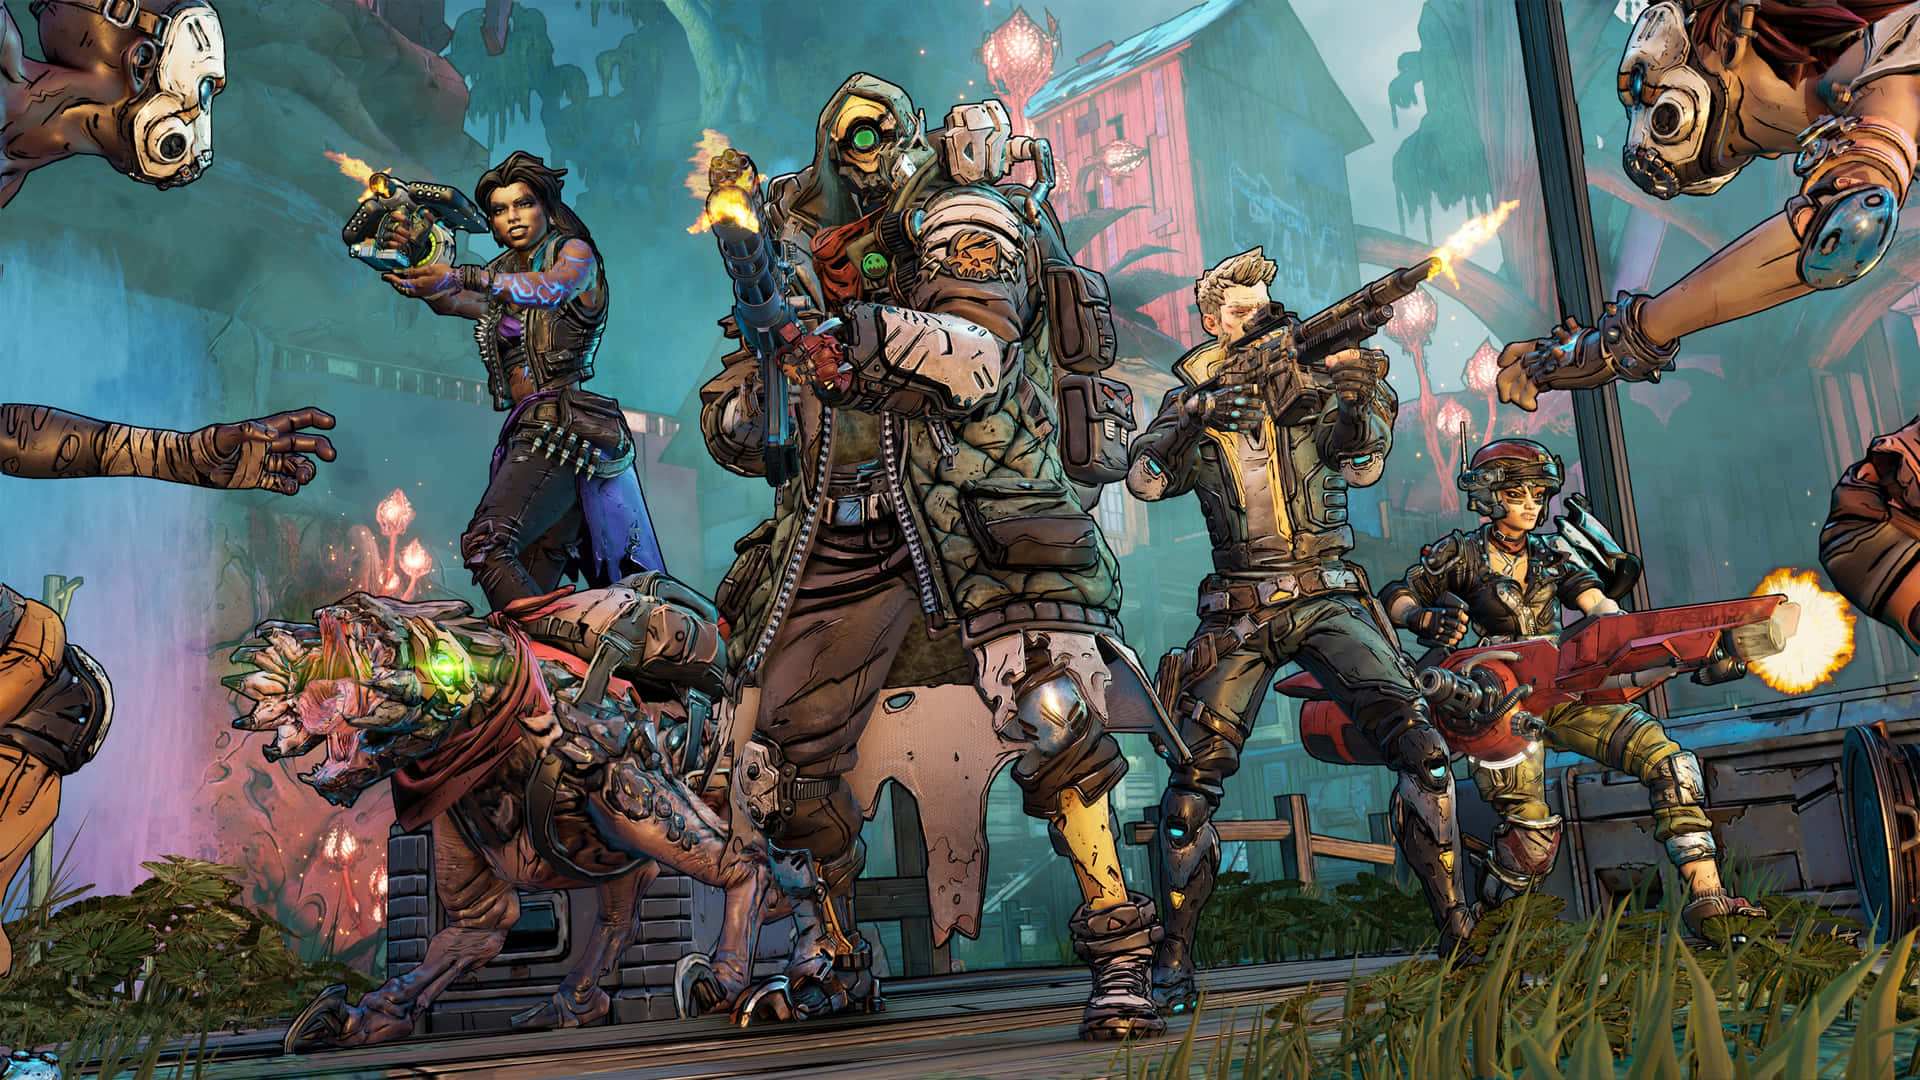 Let's explore the wild unknown of the Borderlands 3 universe